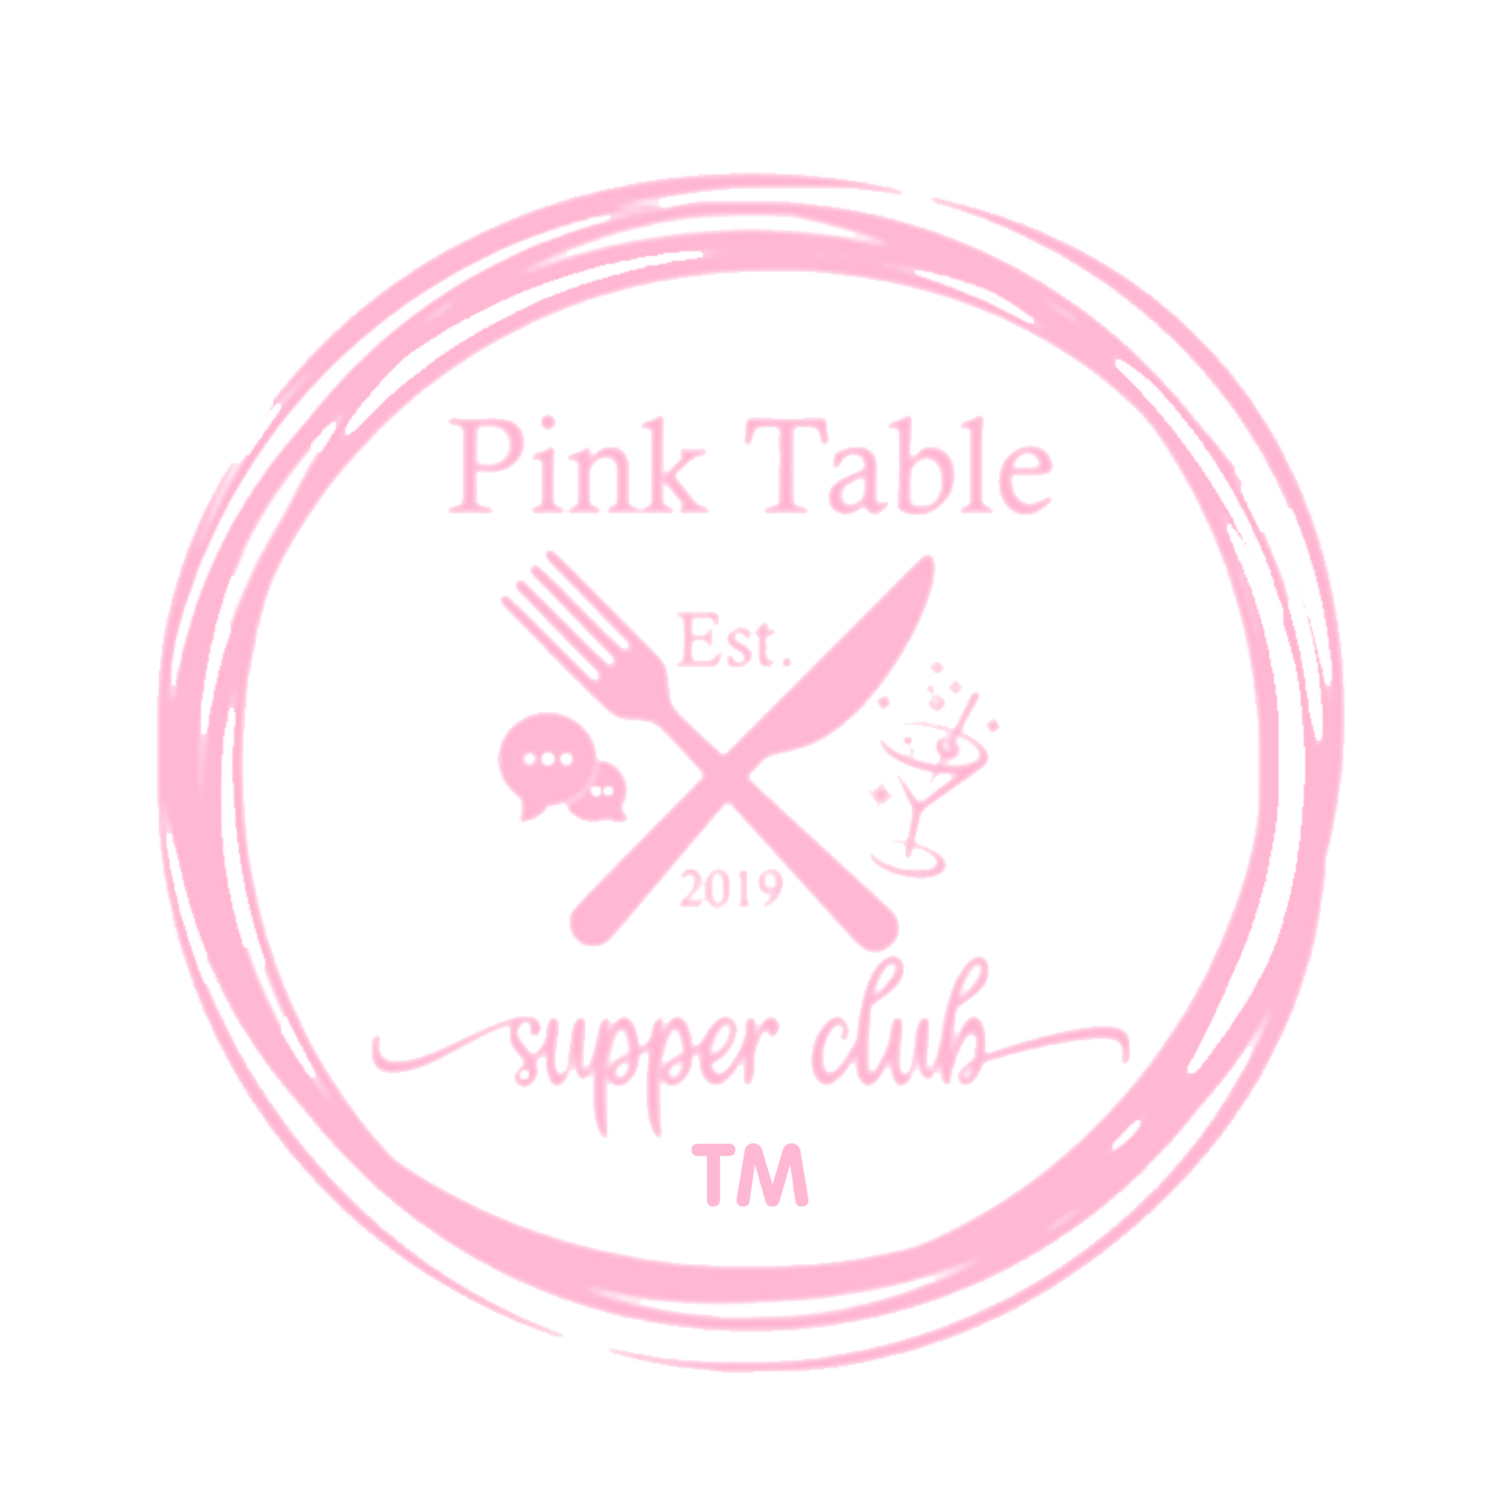 Pink Table Supper Club